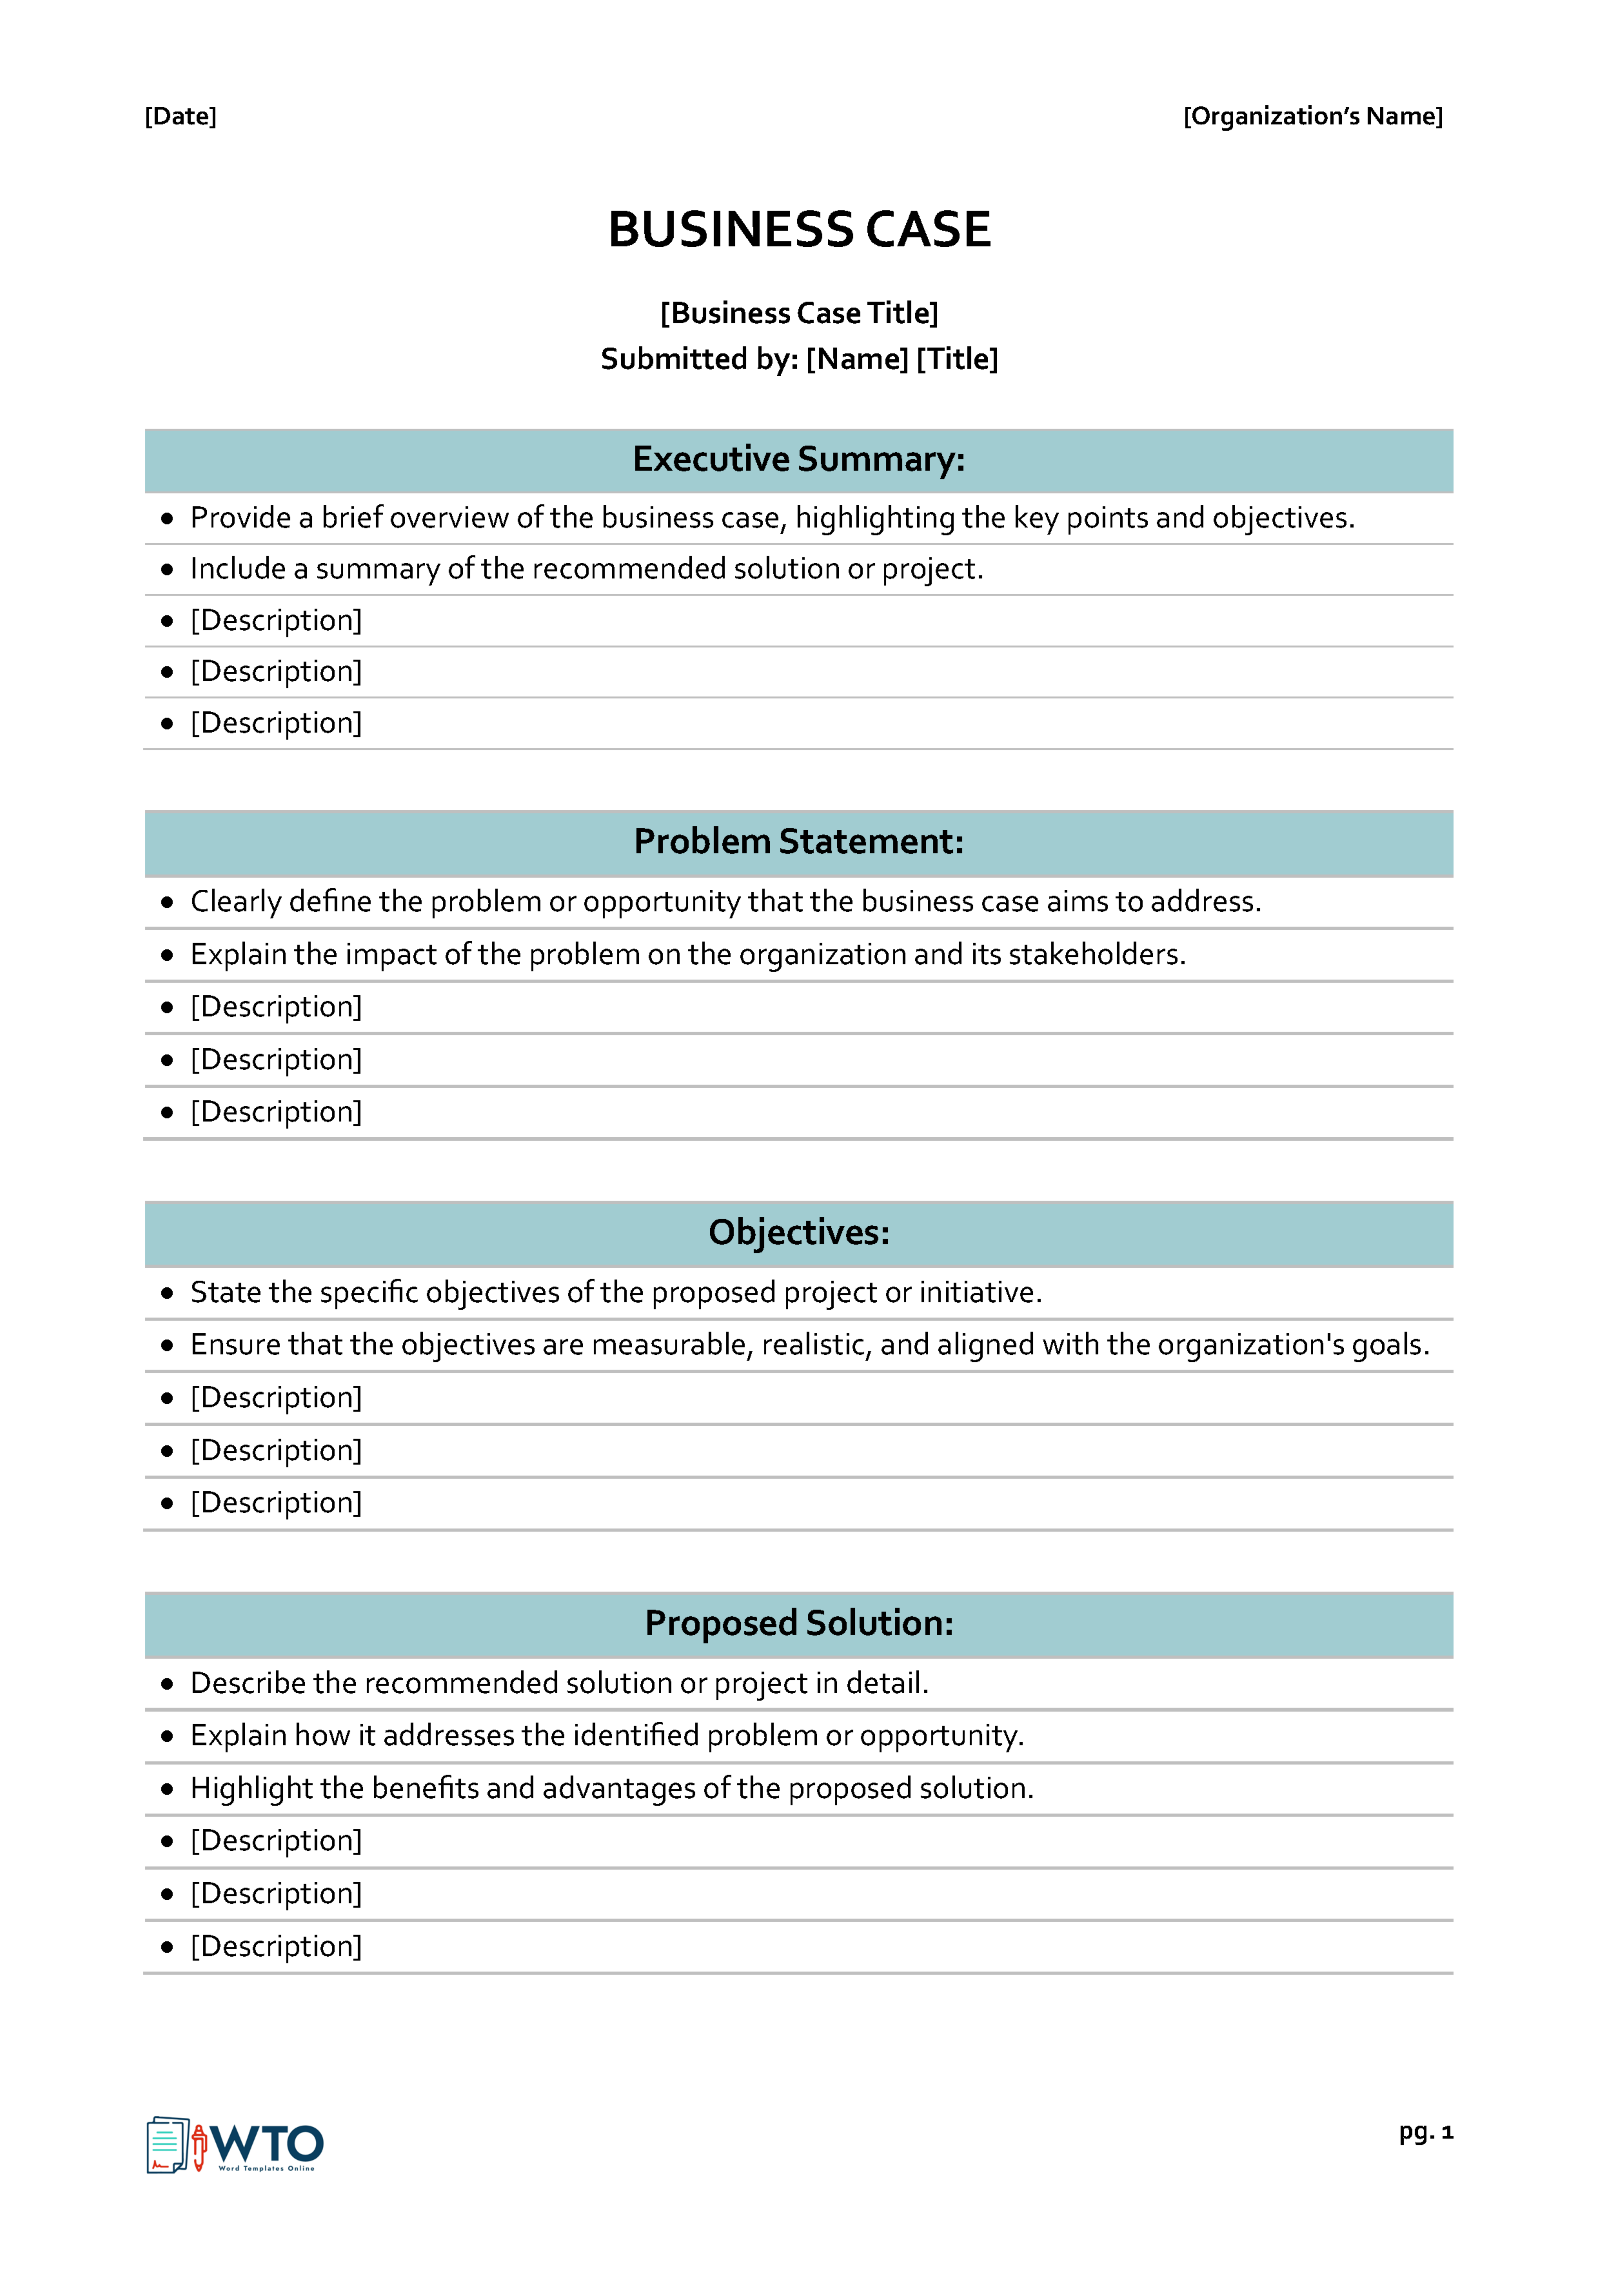 Download Business Case Template